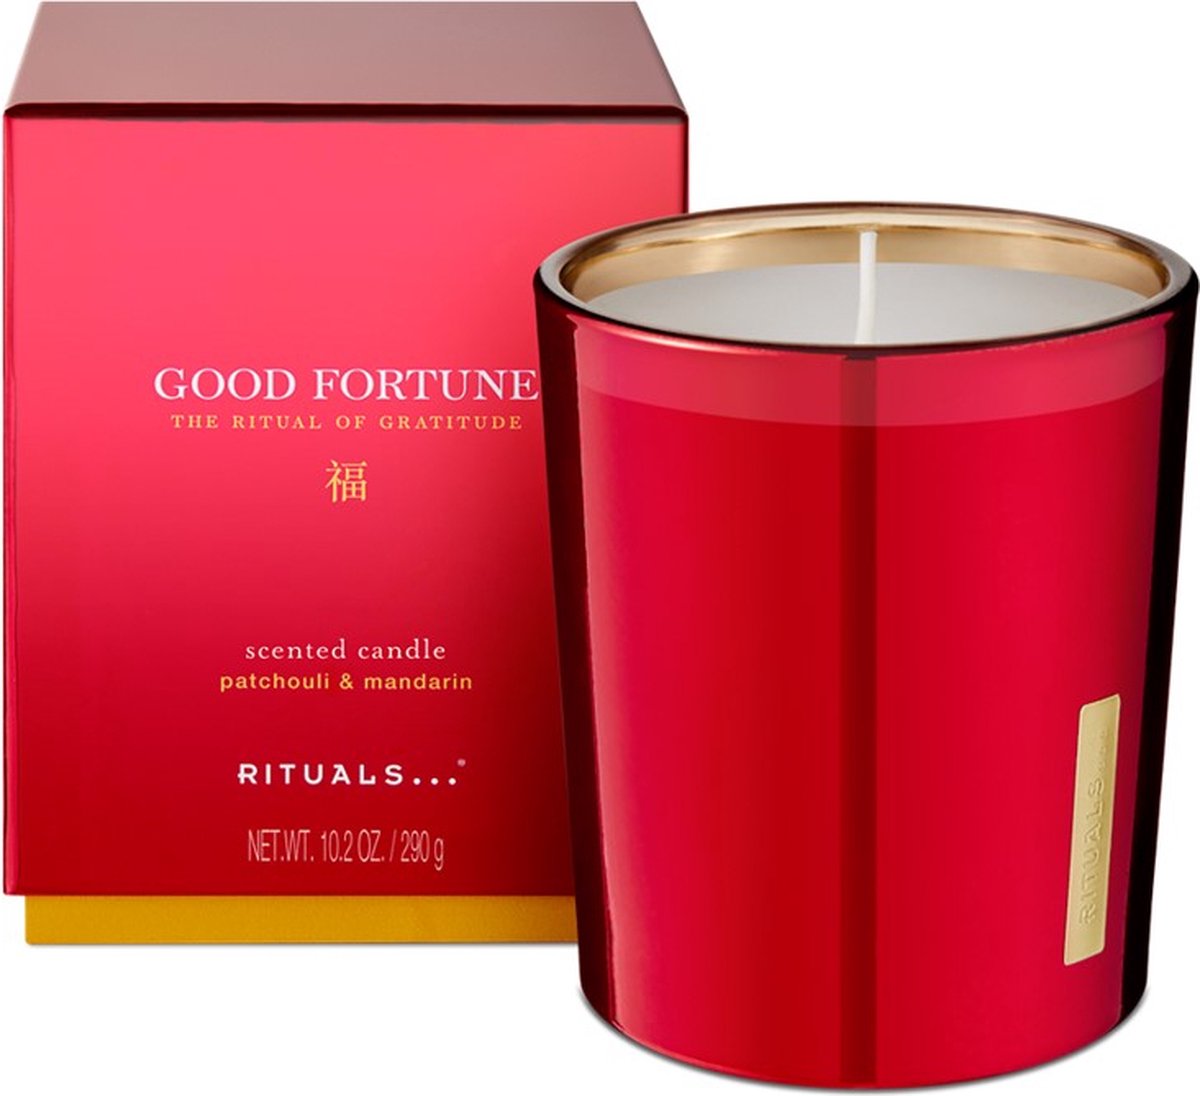 Rituals - Good Fortune - Scented Candle | bol